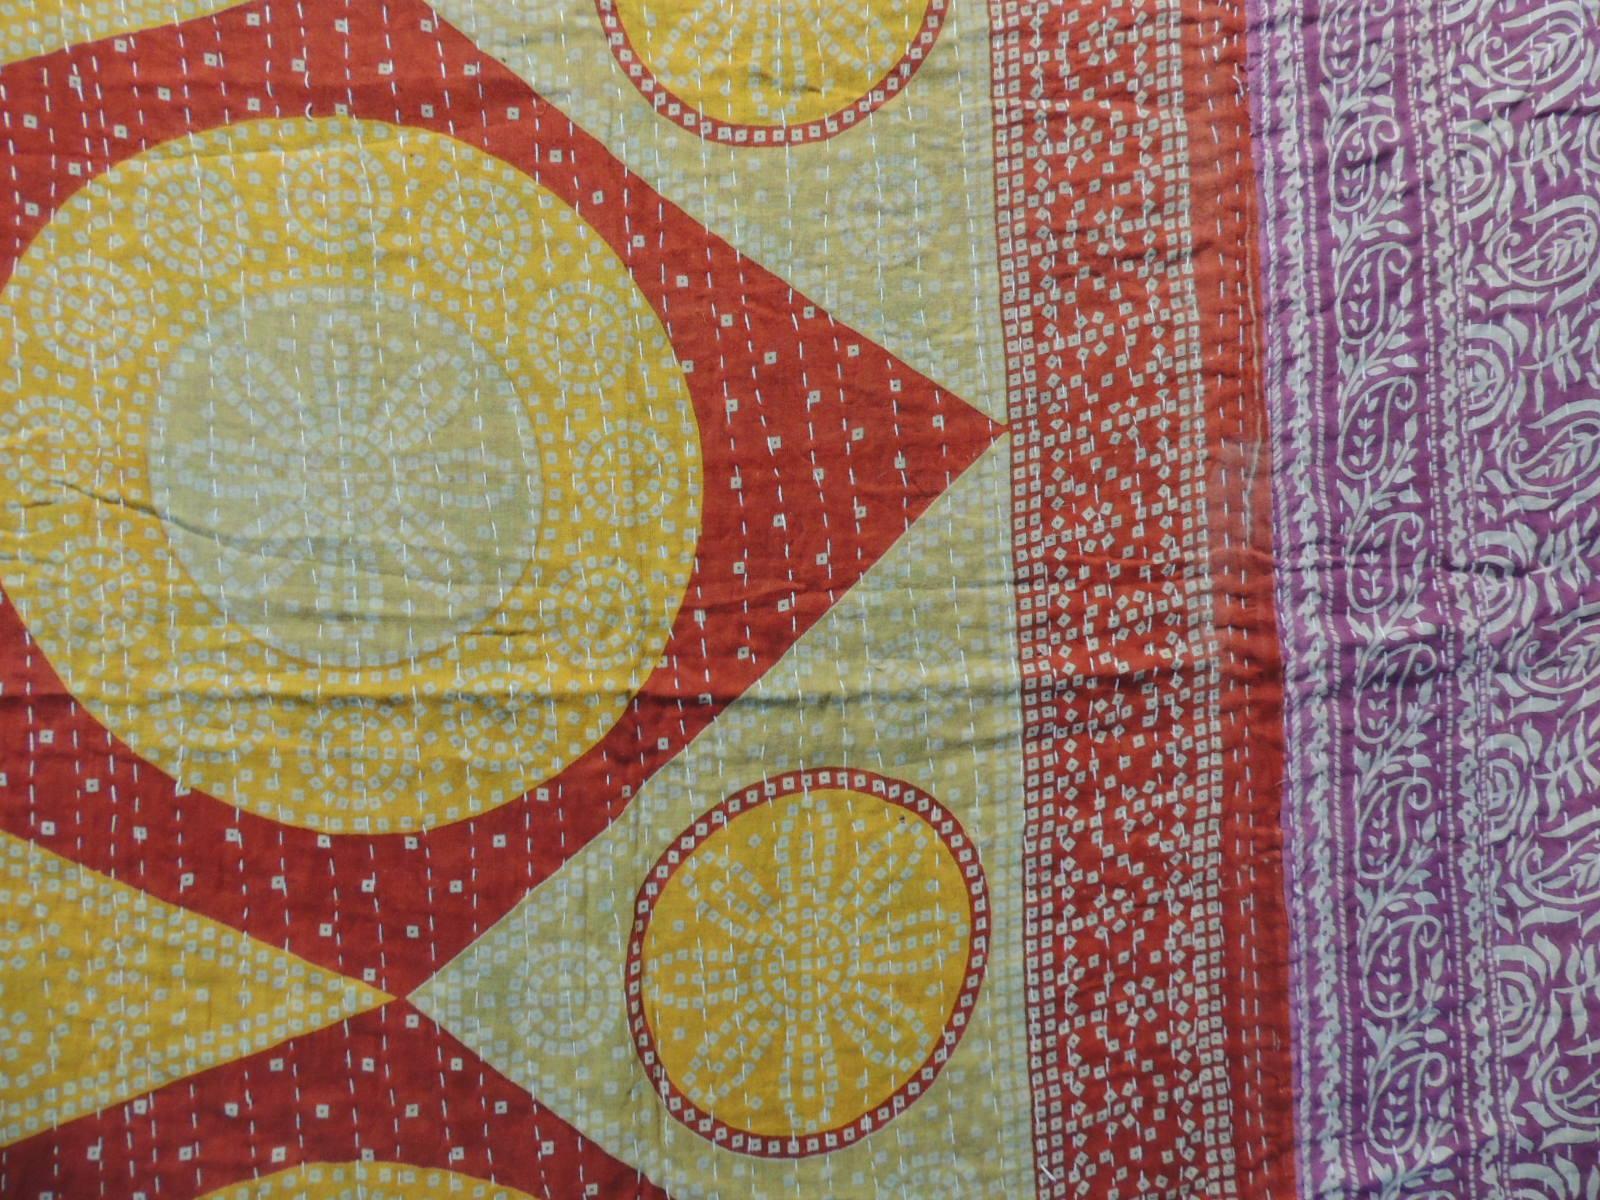 Hand-Crafted Indian Kantha Colorful Quilted Throw with Triangles, Circles and Flowers